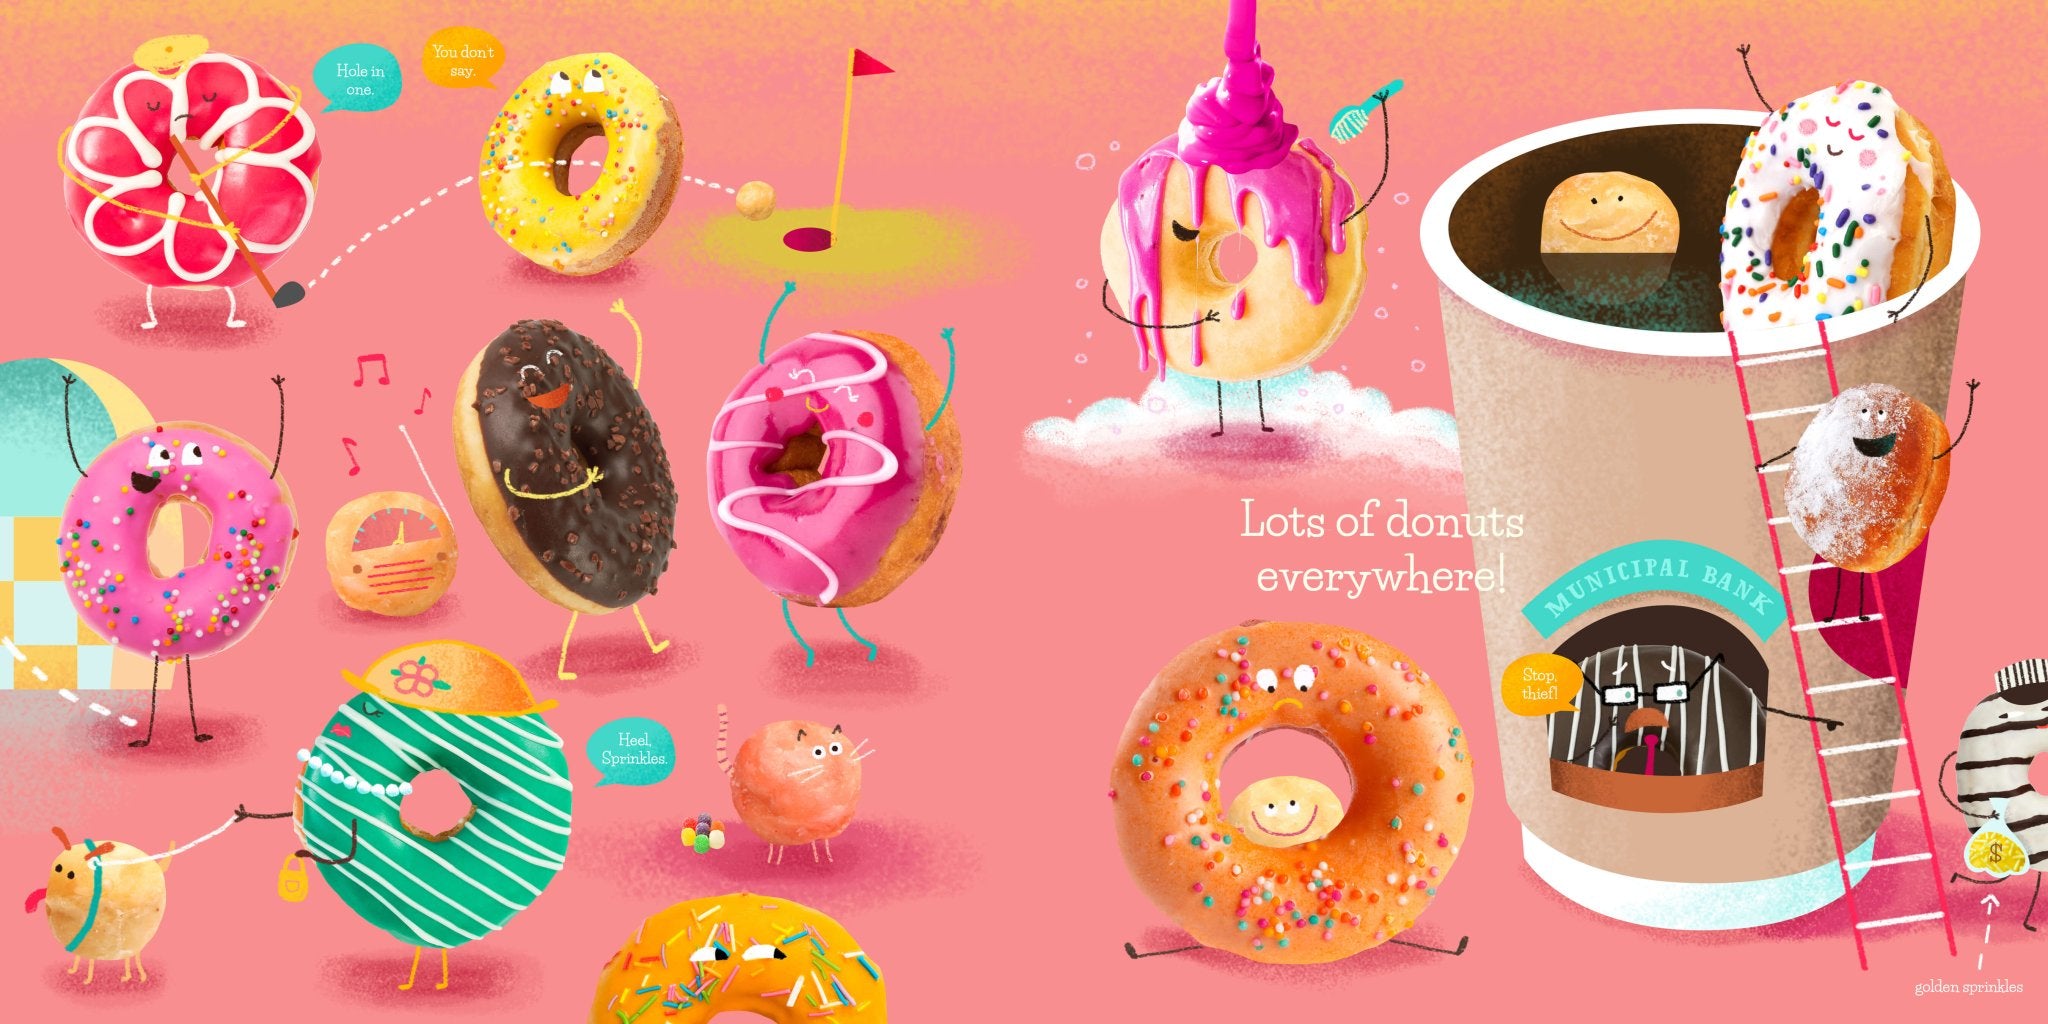 Donuts - The Hole Story - SuperMom Headquarters